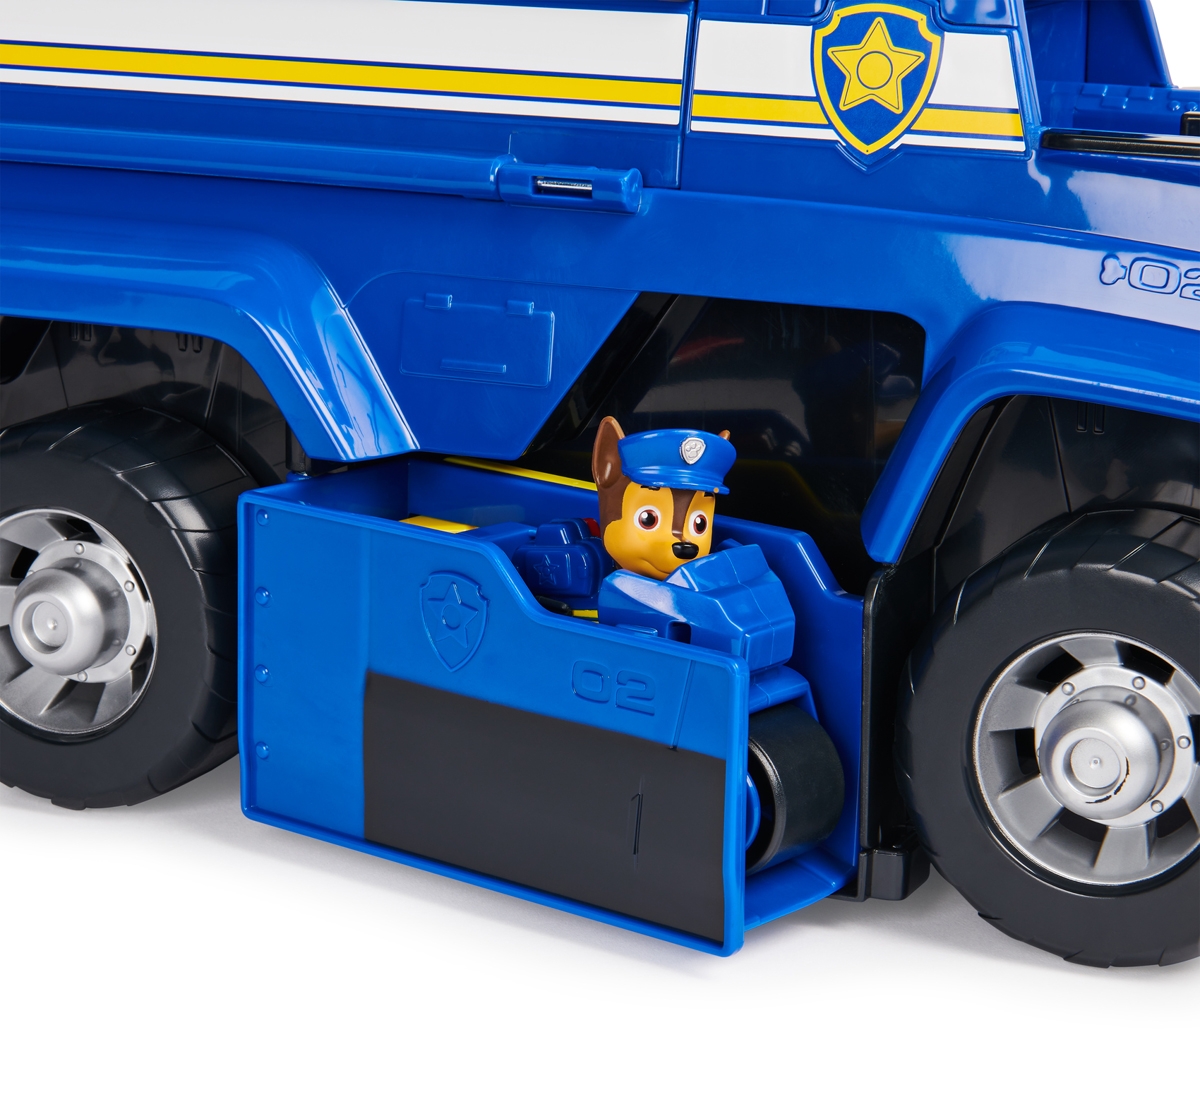 Paw Patrol | Paw Patrol Chase Dluxe Cruser Roleplay Set for Kids 3Y+, Blue 5